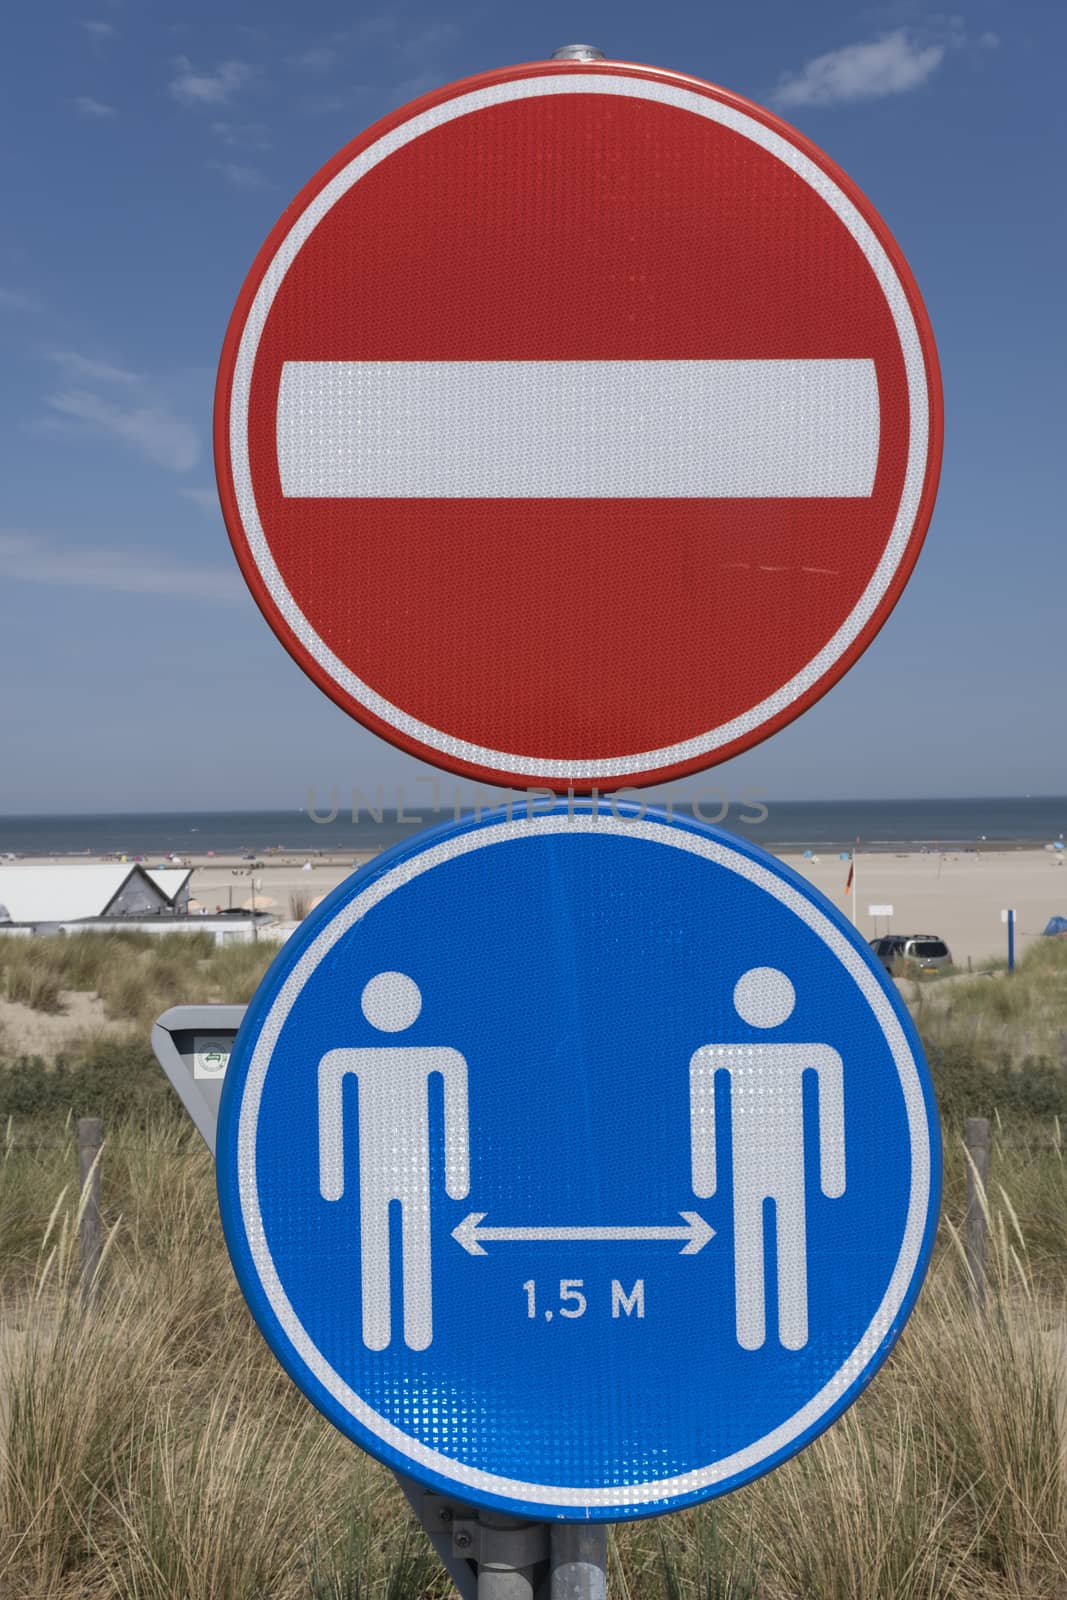 Road sign of social distancing. 1.5 meter distance, together against COVID-19 by Tjeerdkruse